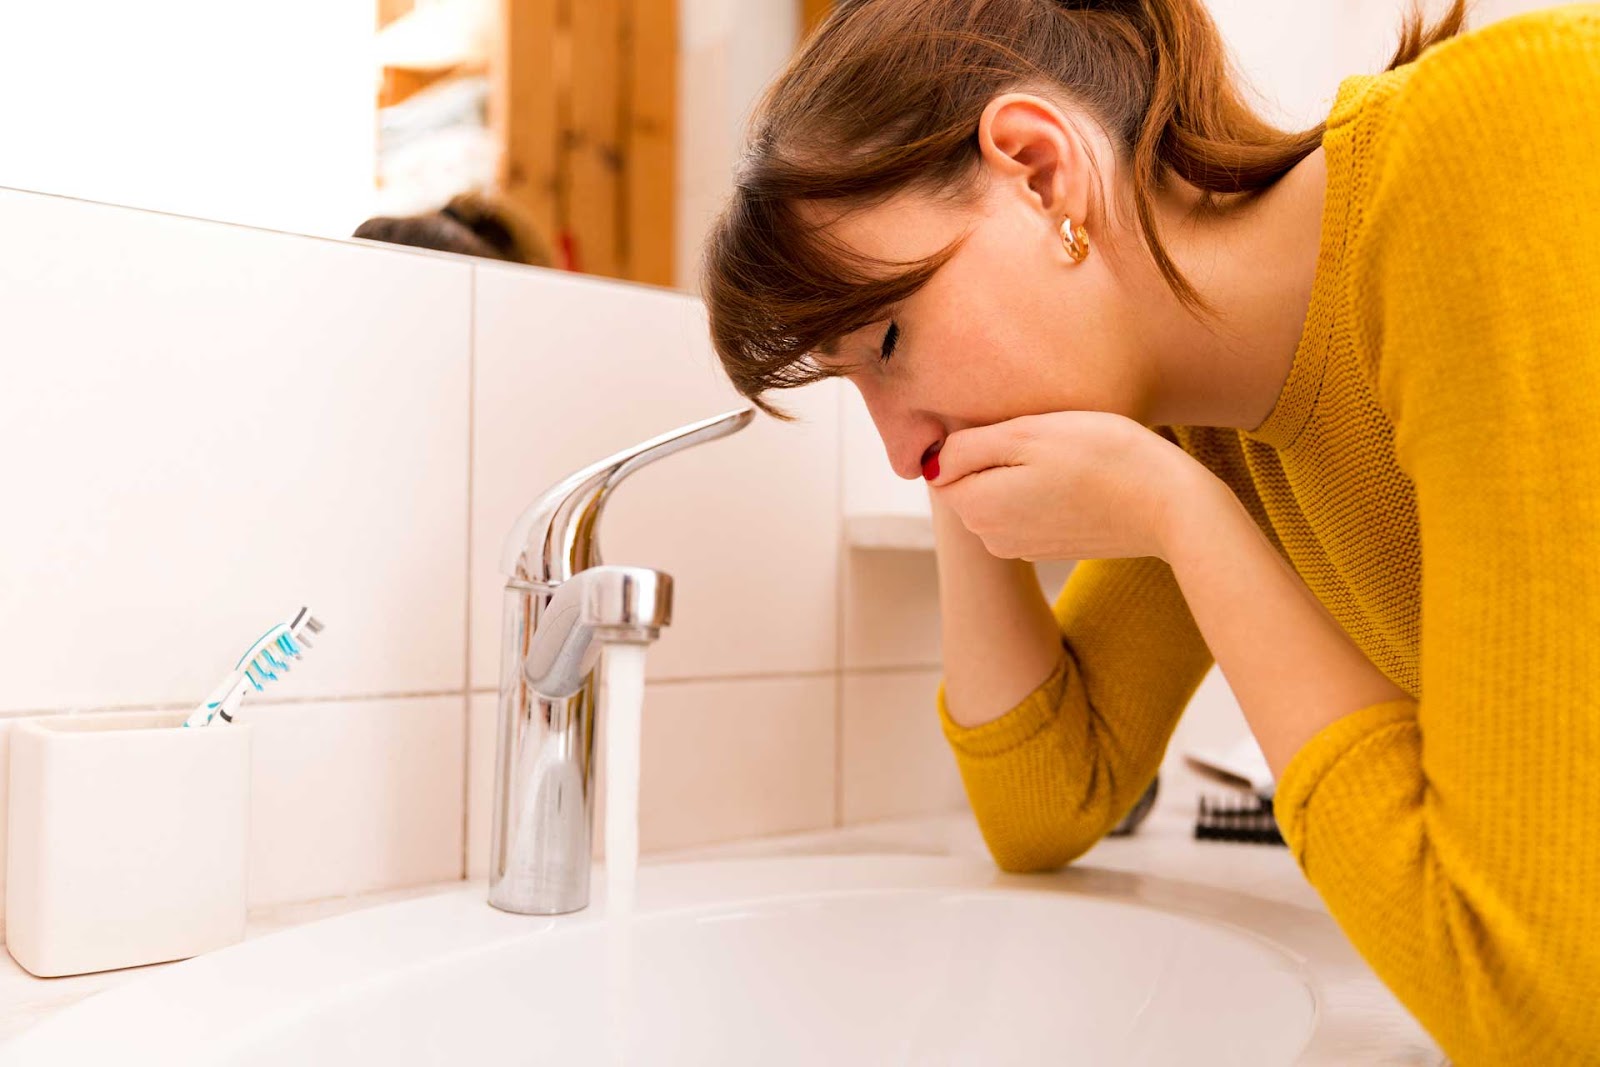 Woman leans over bathroom sink to rinse her mouth, apparently feeling ill.